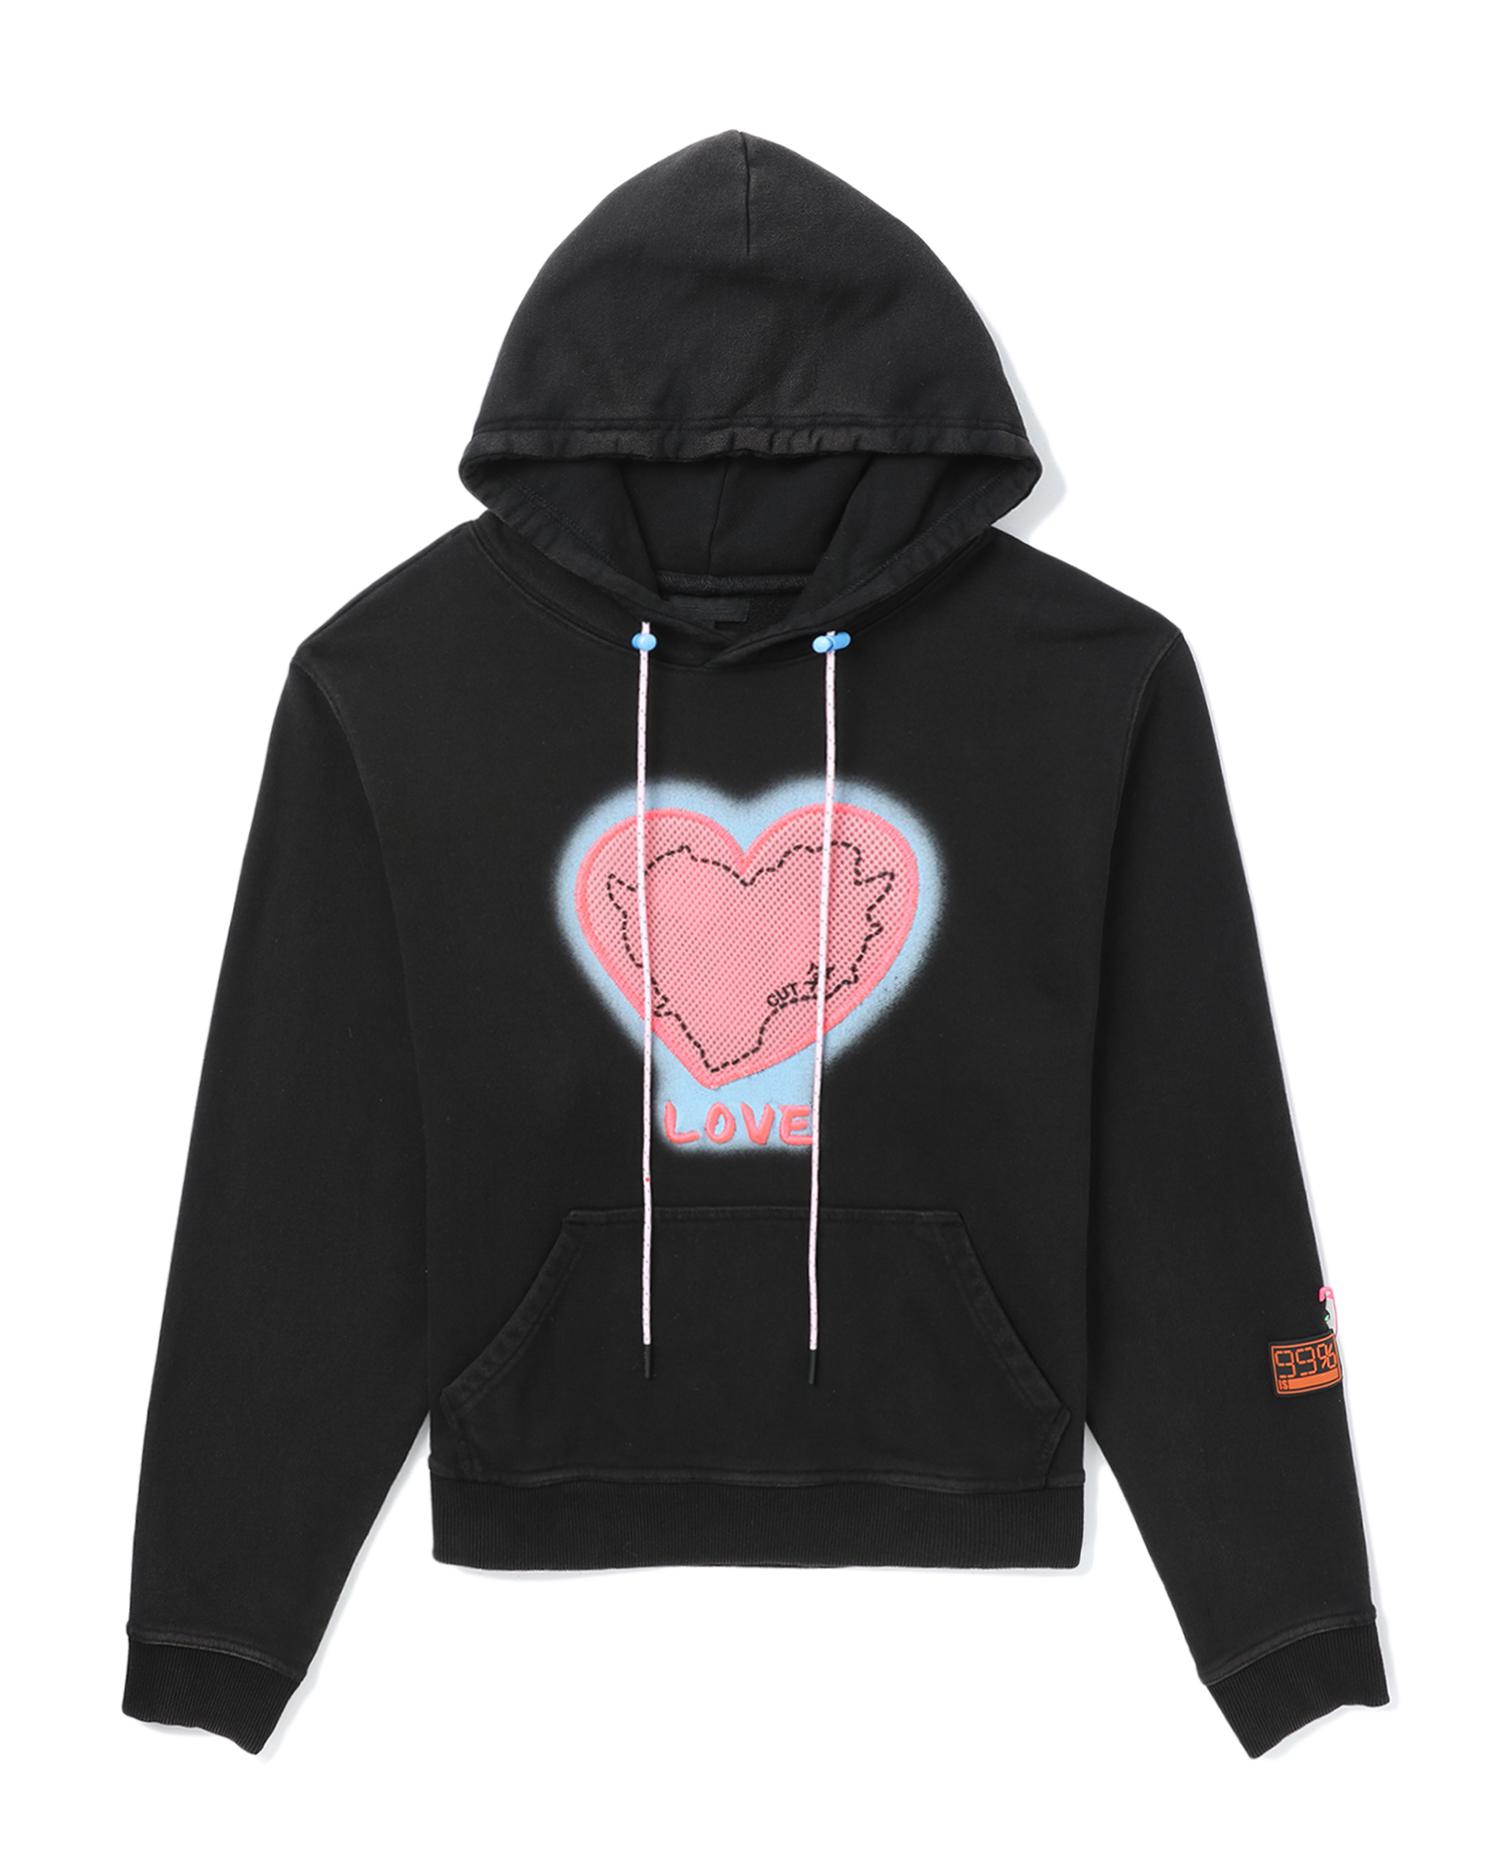 Sex washed hoodie by 99%IS